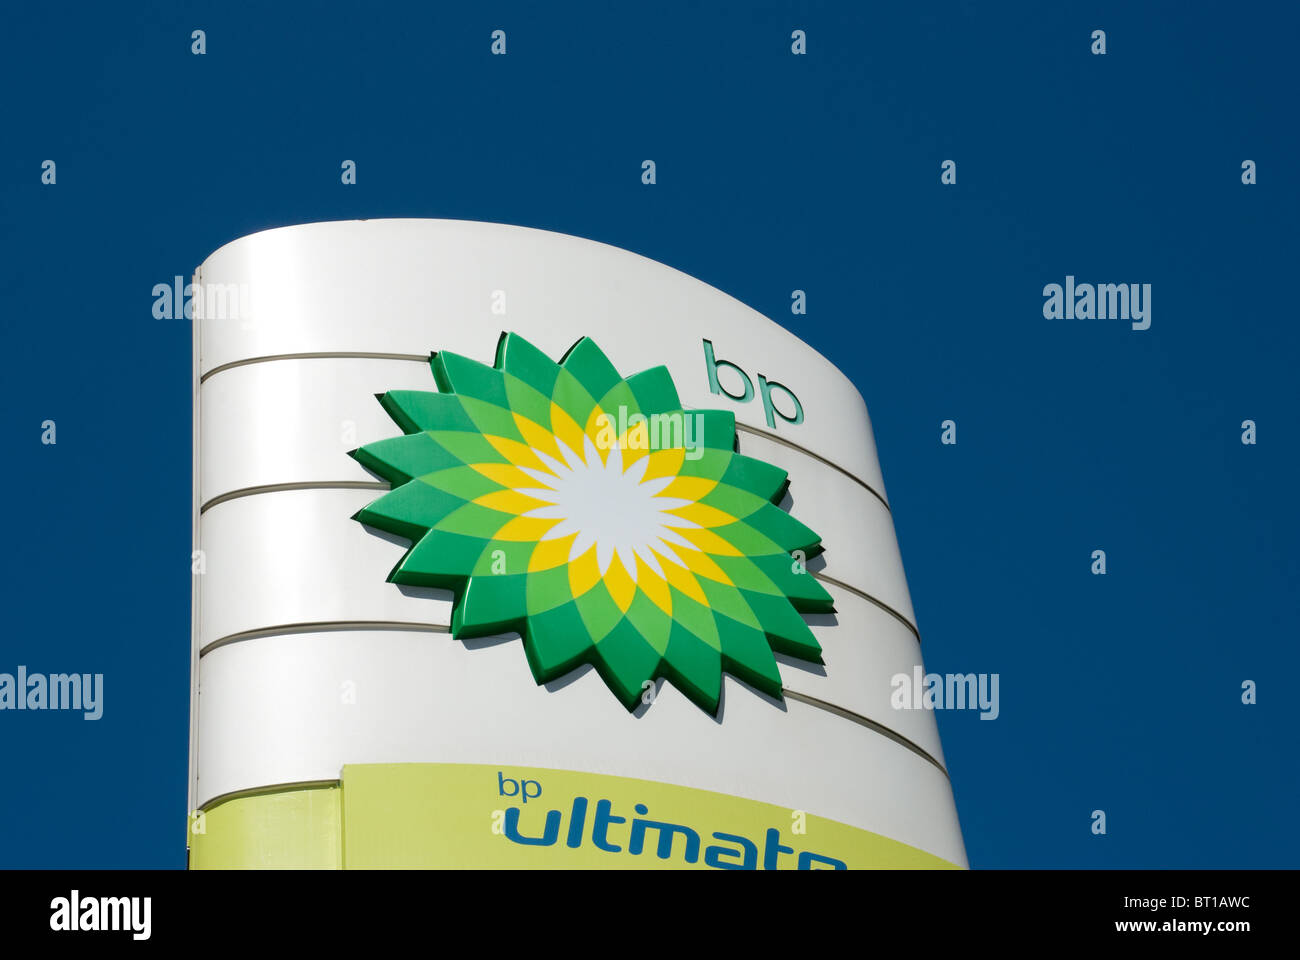 BP petrol station, tower with logo against blue sky Stock Photo